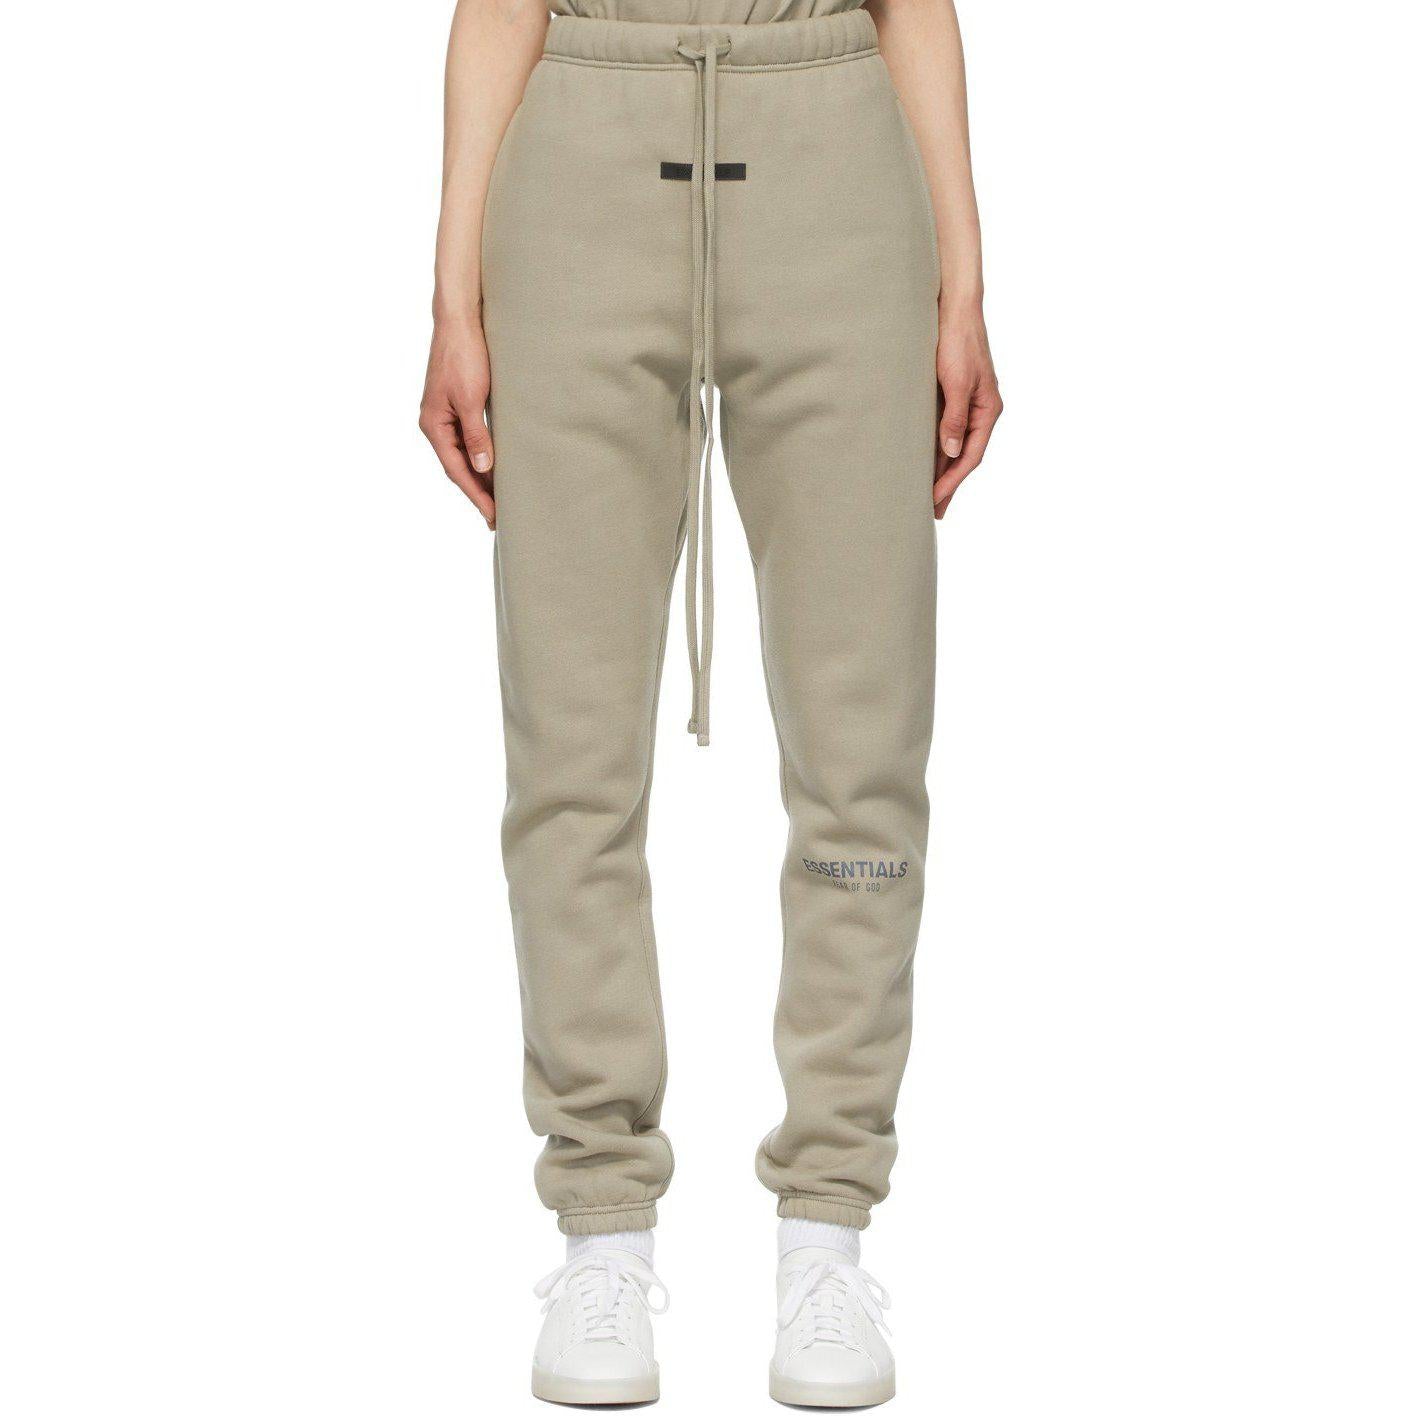 FEAR OF GOD ESSENTIALS Sweatpants (Moss) SS21 - Waves Never Die